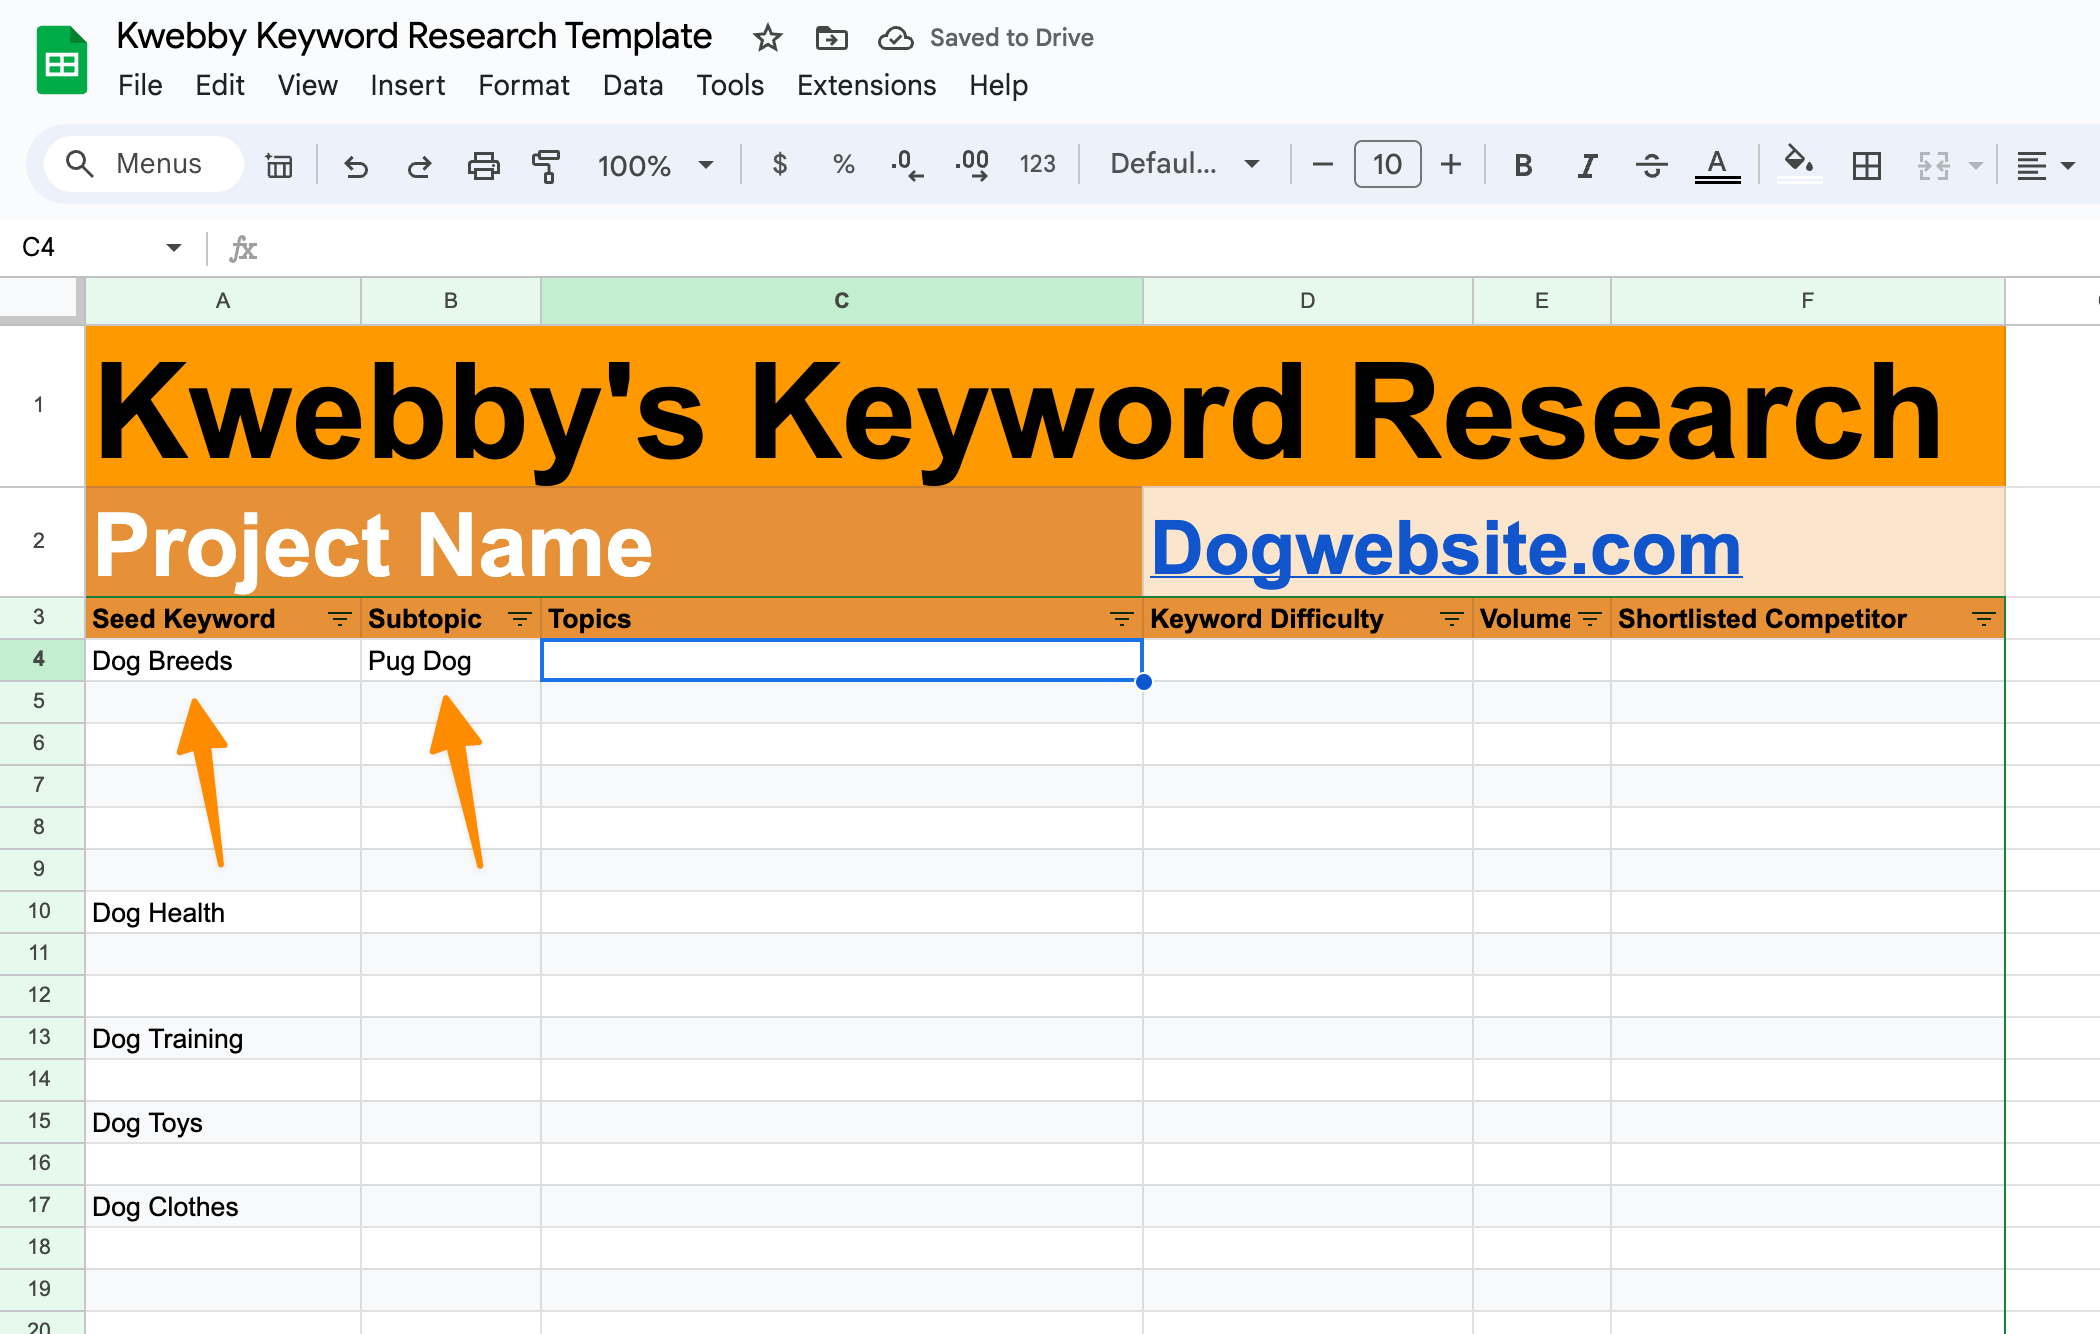 How to do Keyword Research for New Sites to Get 100k Traffic (Template Inside) 2